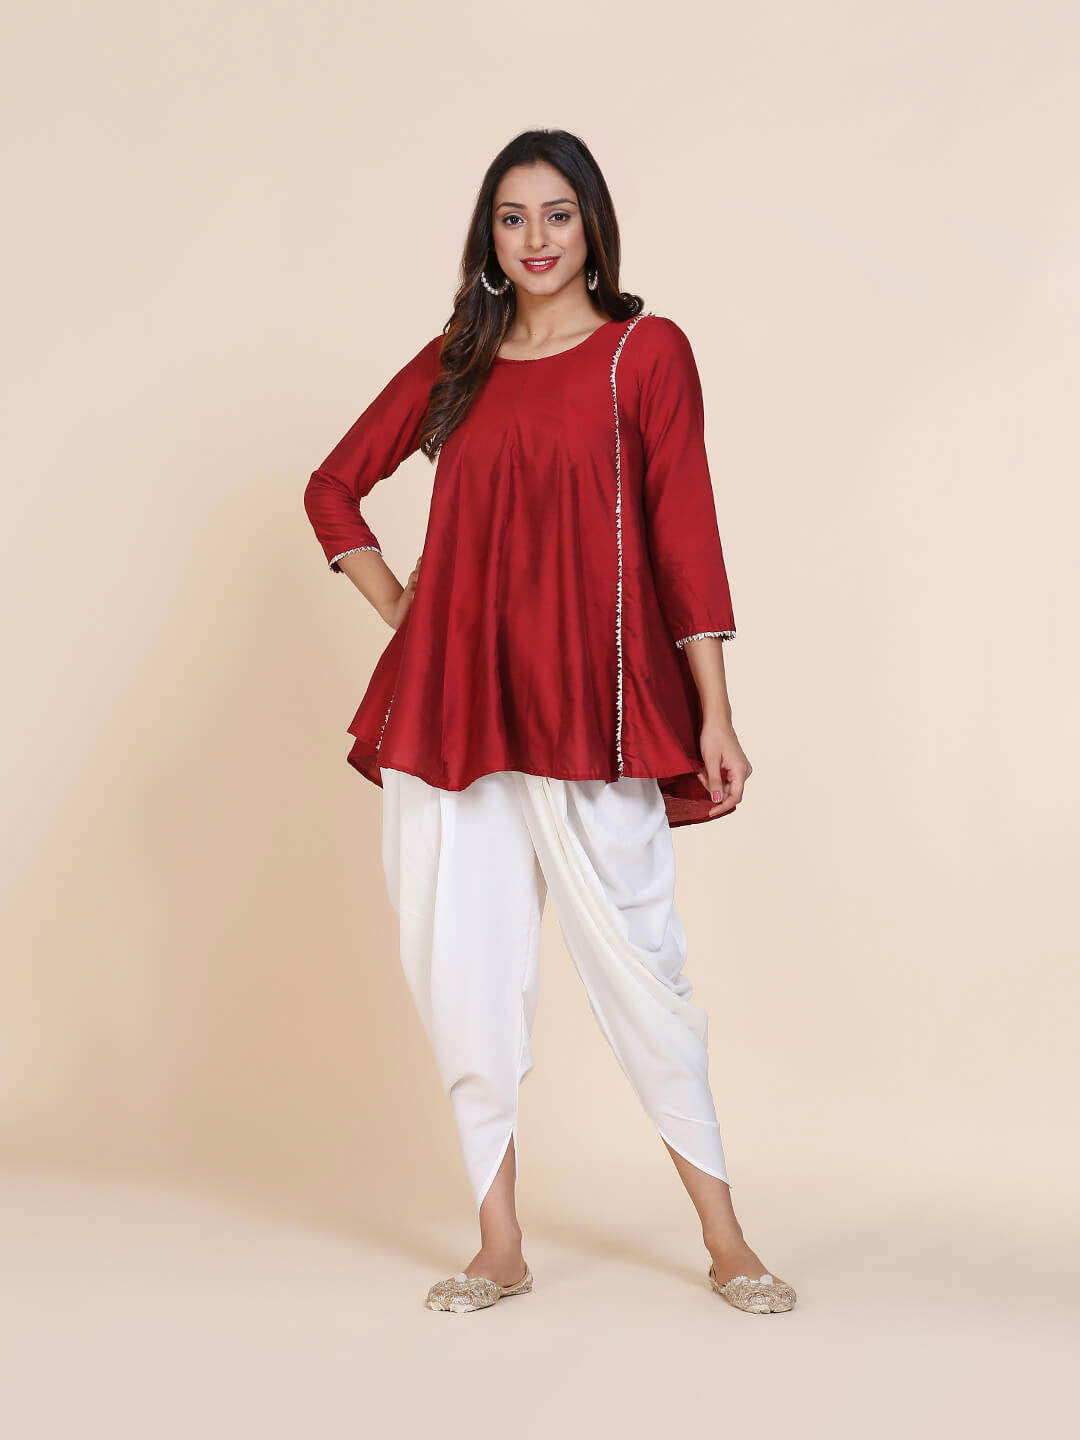 How many different stylish ways are there to wear dhoti pants for females?  - Quora